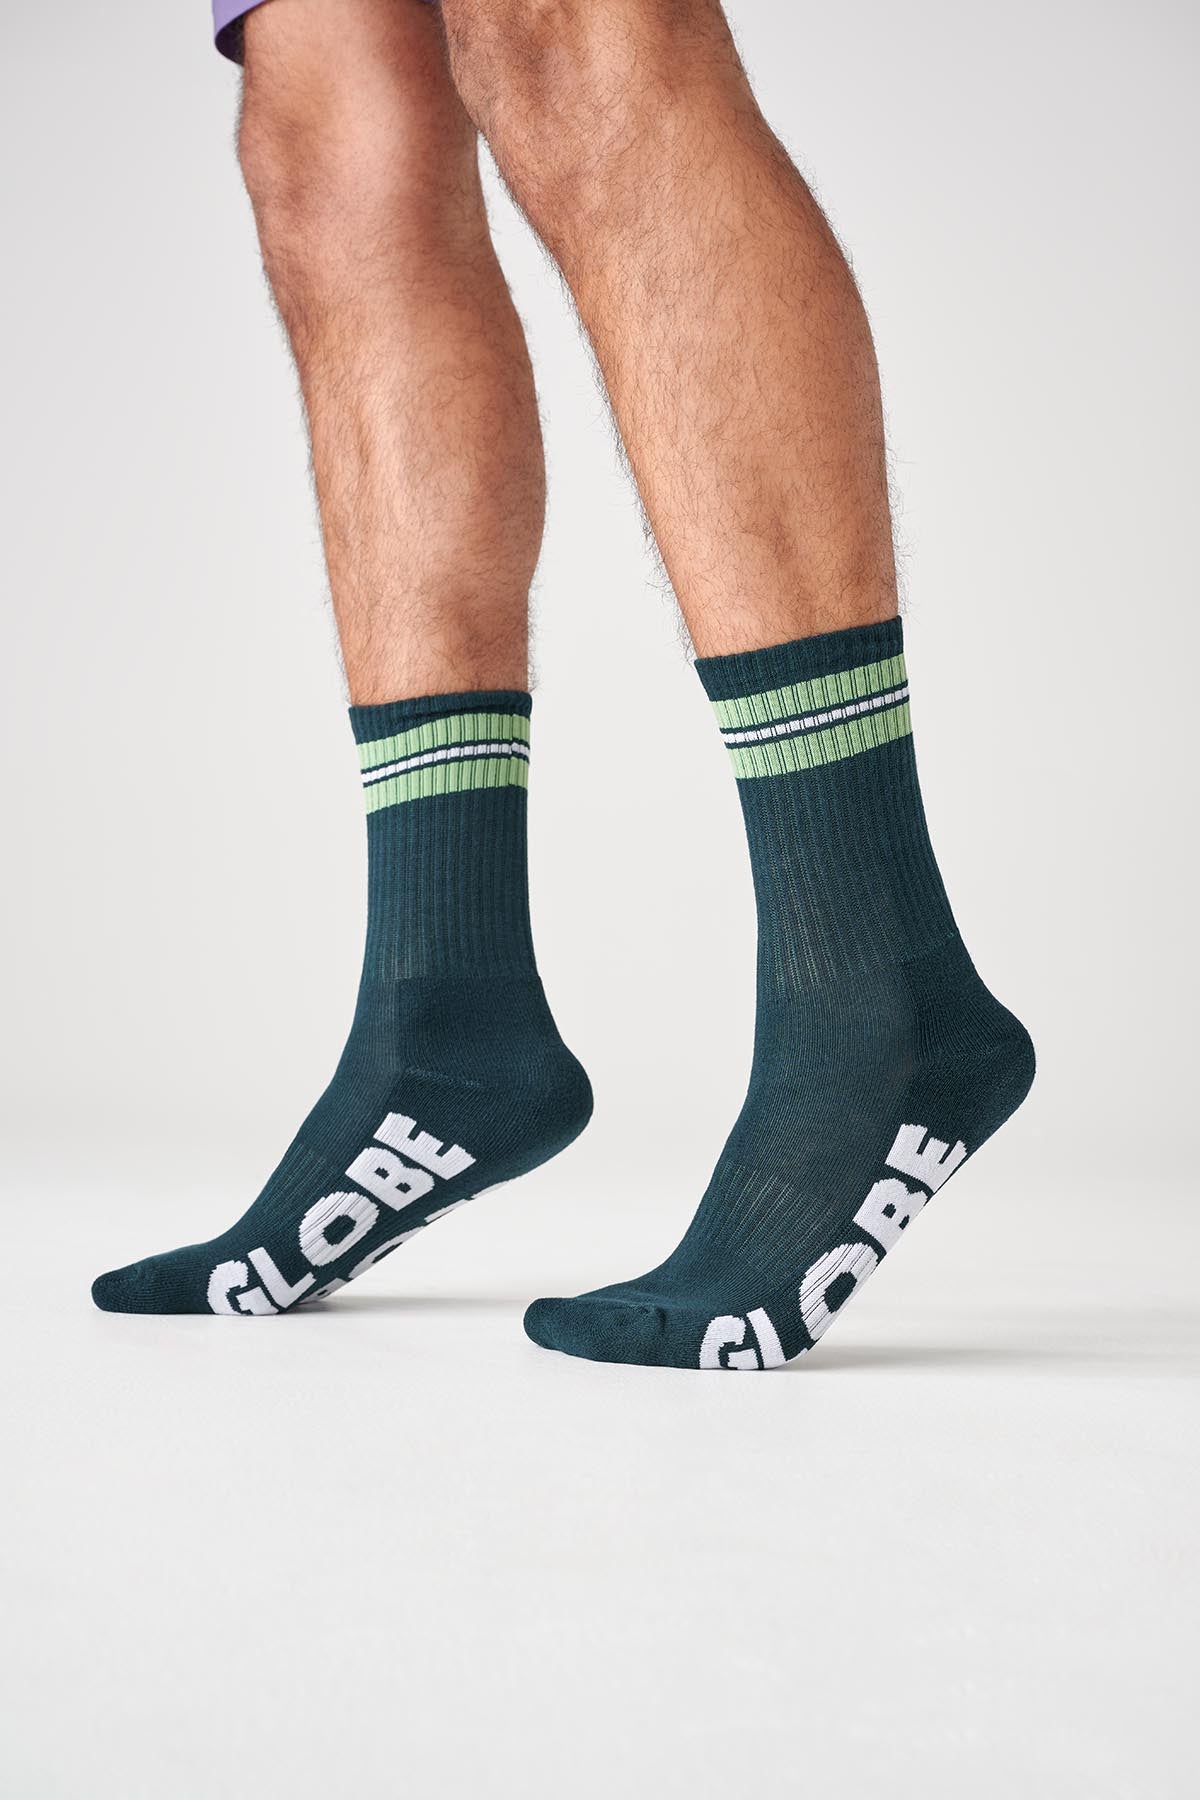 off course crew sock 3 pack assorted